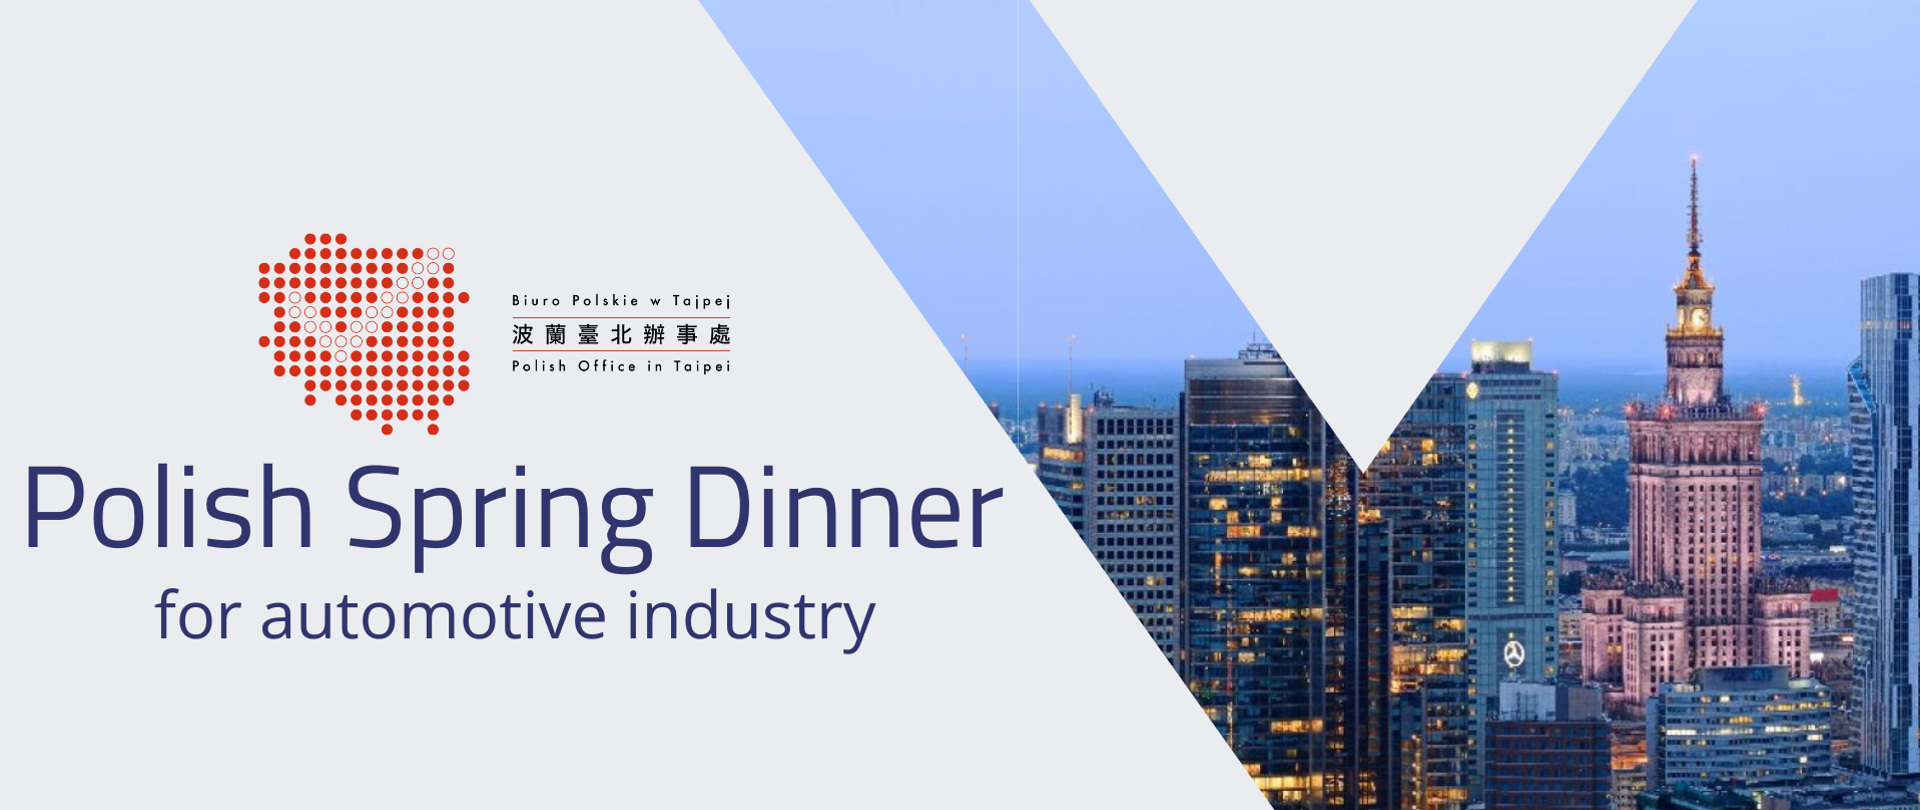 Polish Spring Dinner for automotive industry